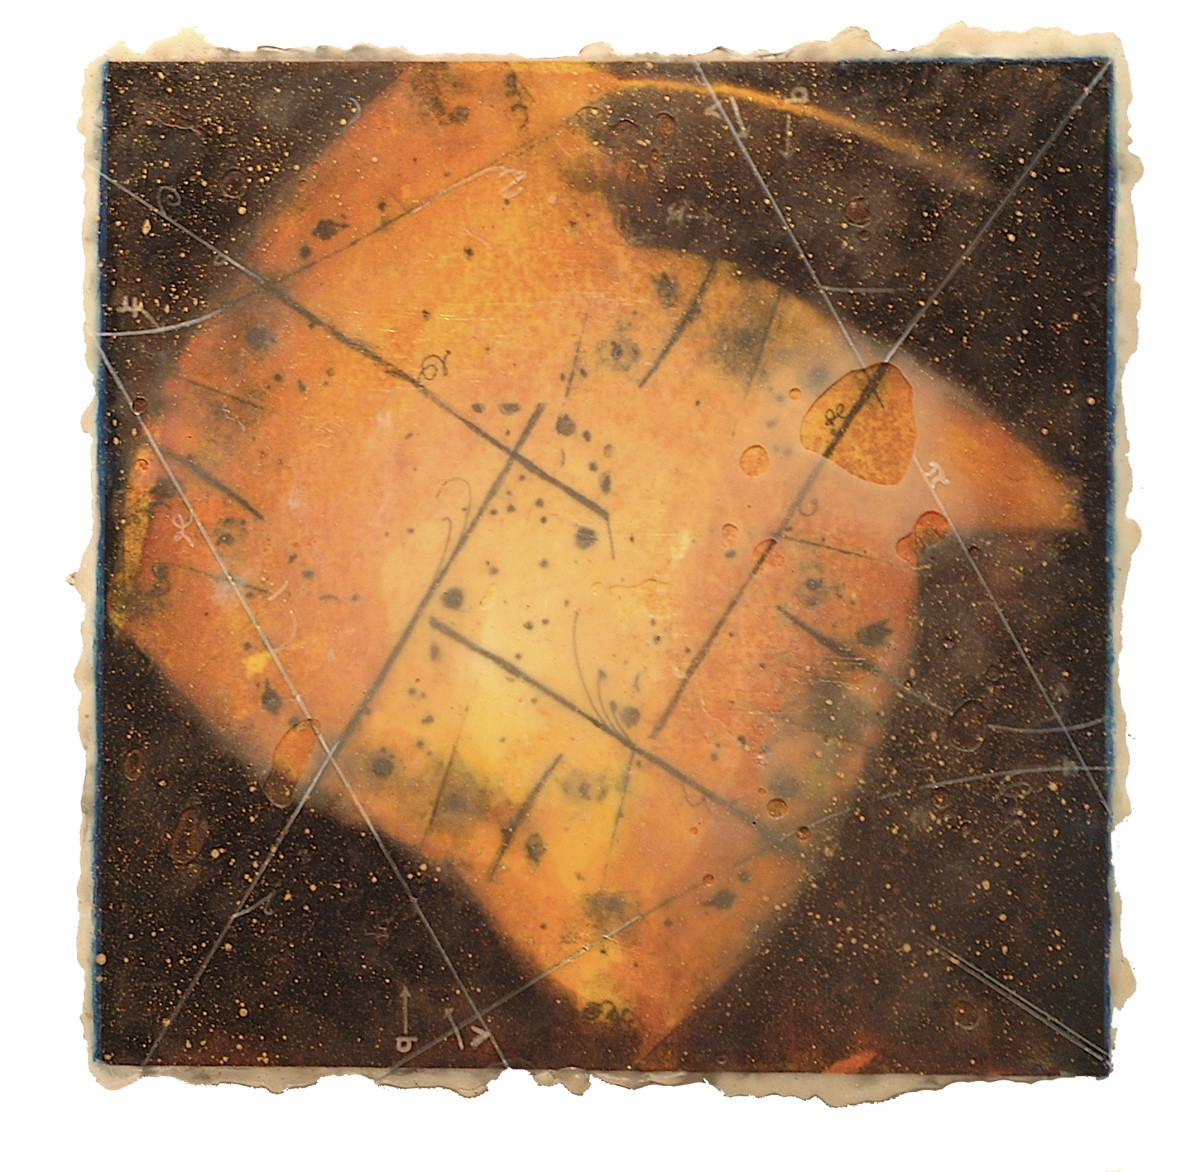 Riddle Sphere by Elise Wagner Fine Art, LLC  Image: This piece began as an toner transfer print on paper that is mounted to a panel and buried under layers of wax. It is inspired by mathematical riddles and solar storms on the sun.